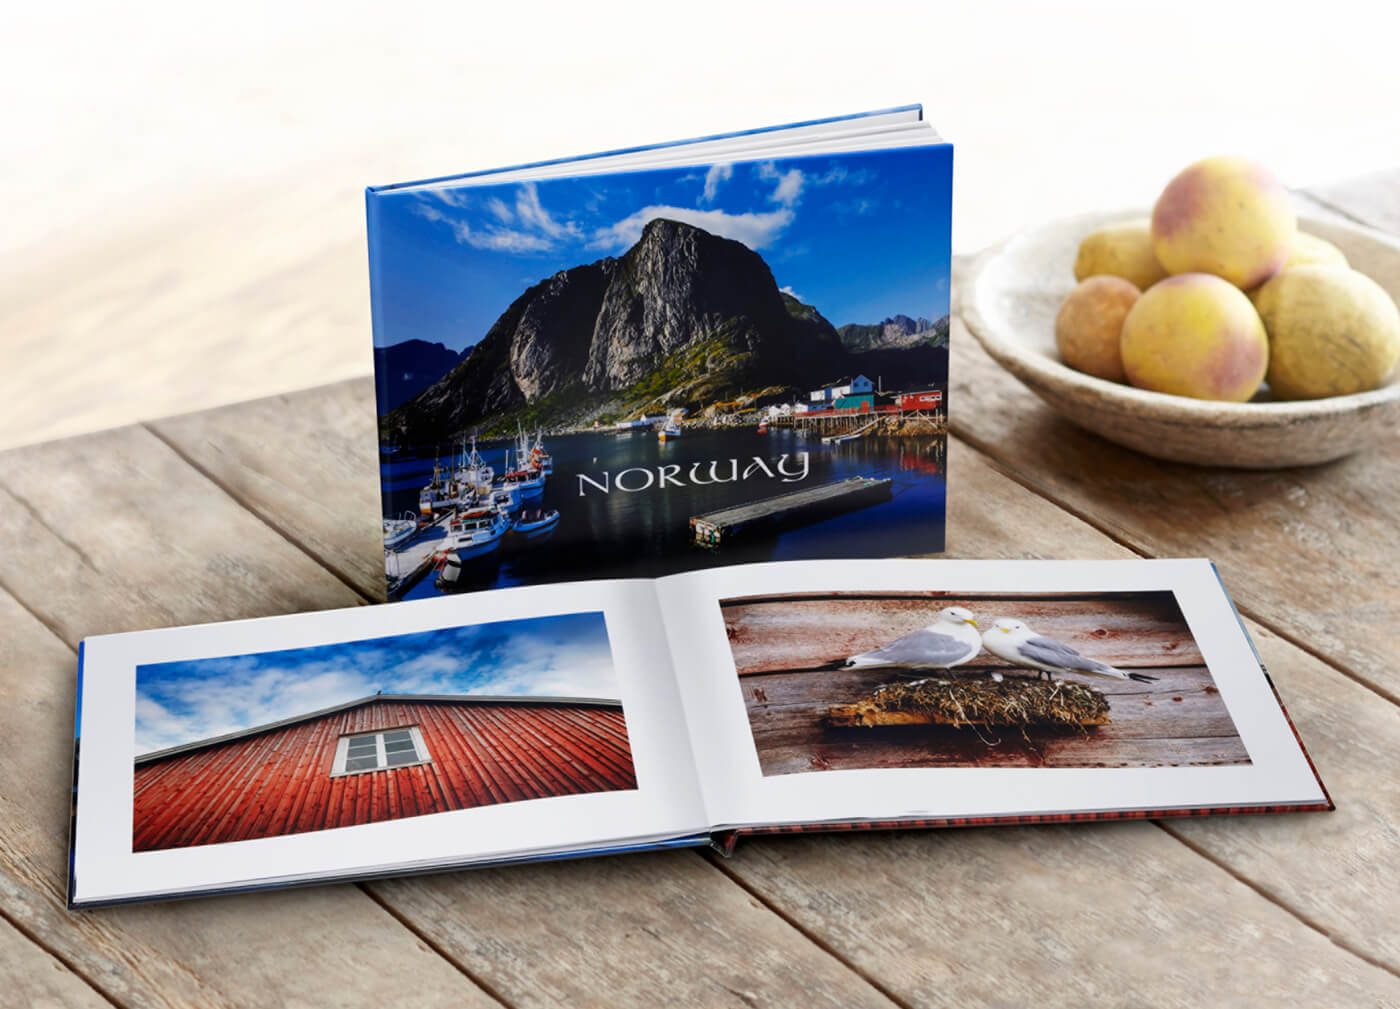 photo book of norway by printique on table